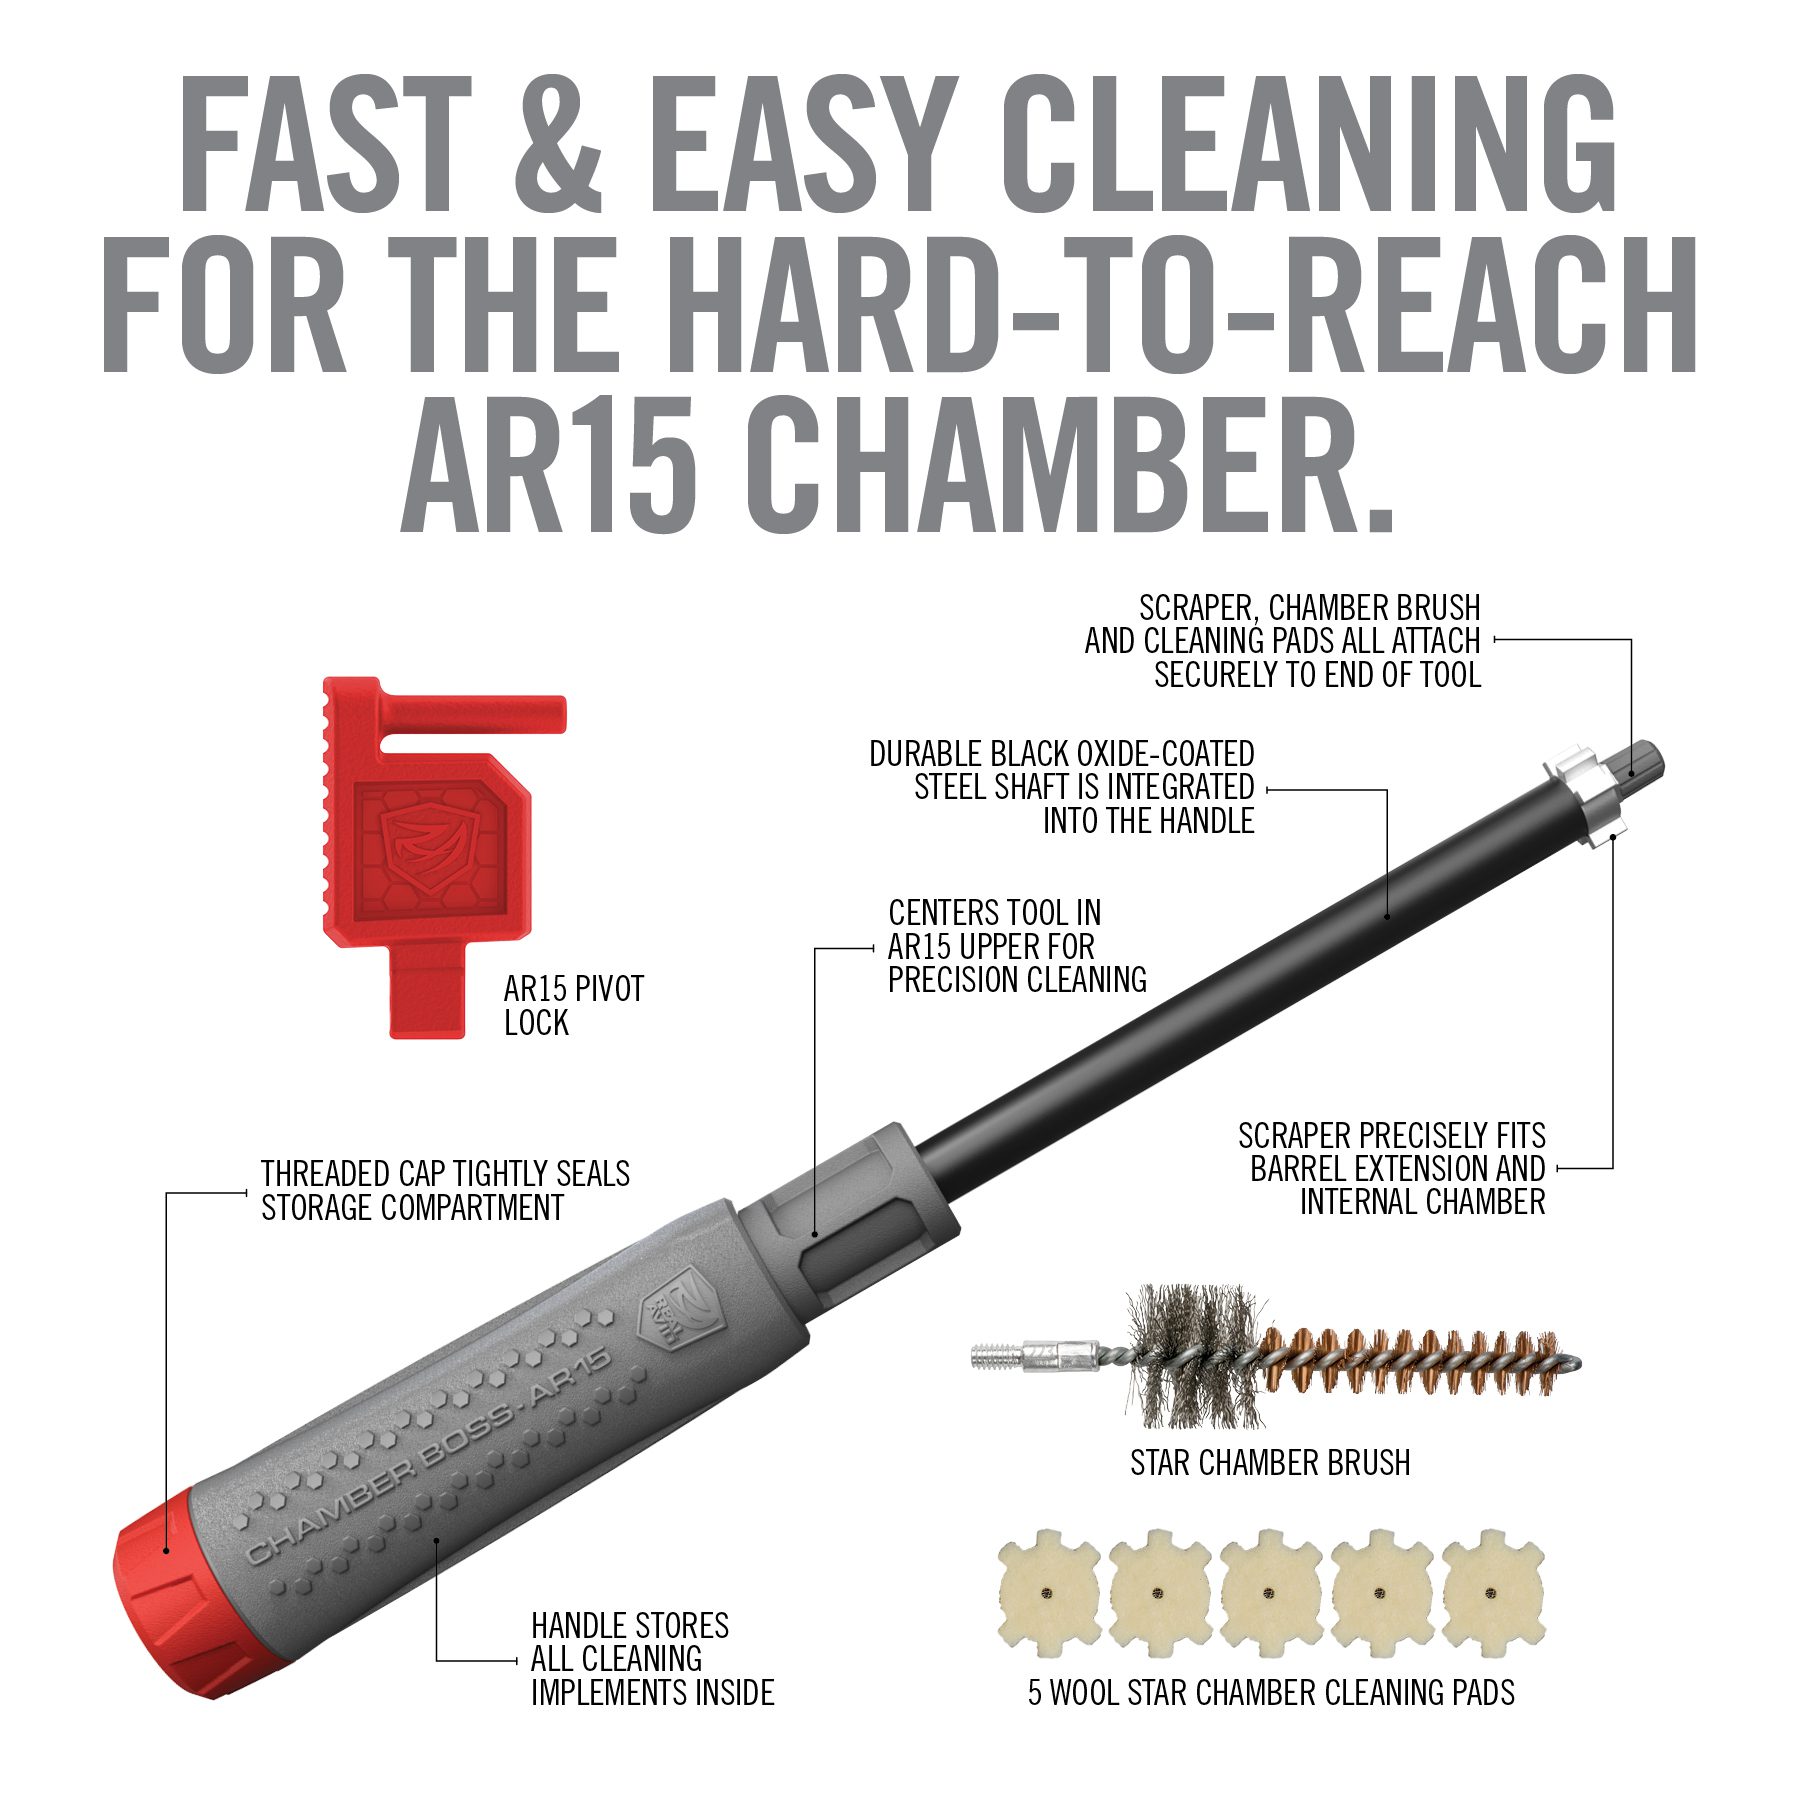 the parts of an ar - 15 hammer